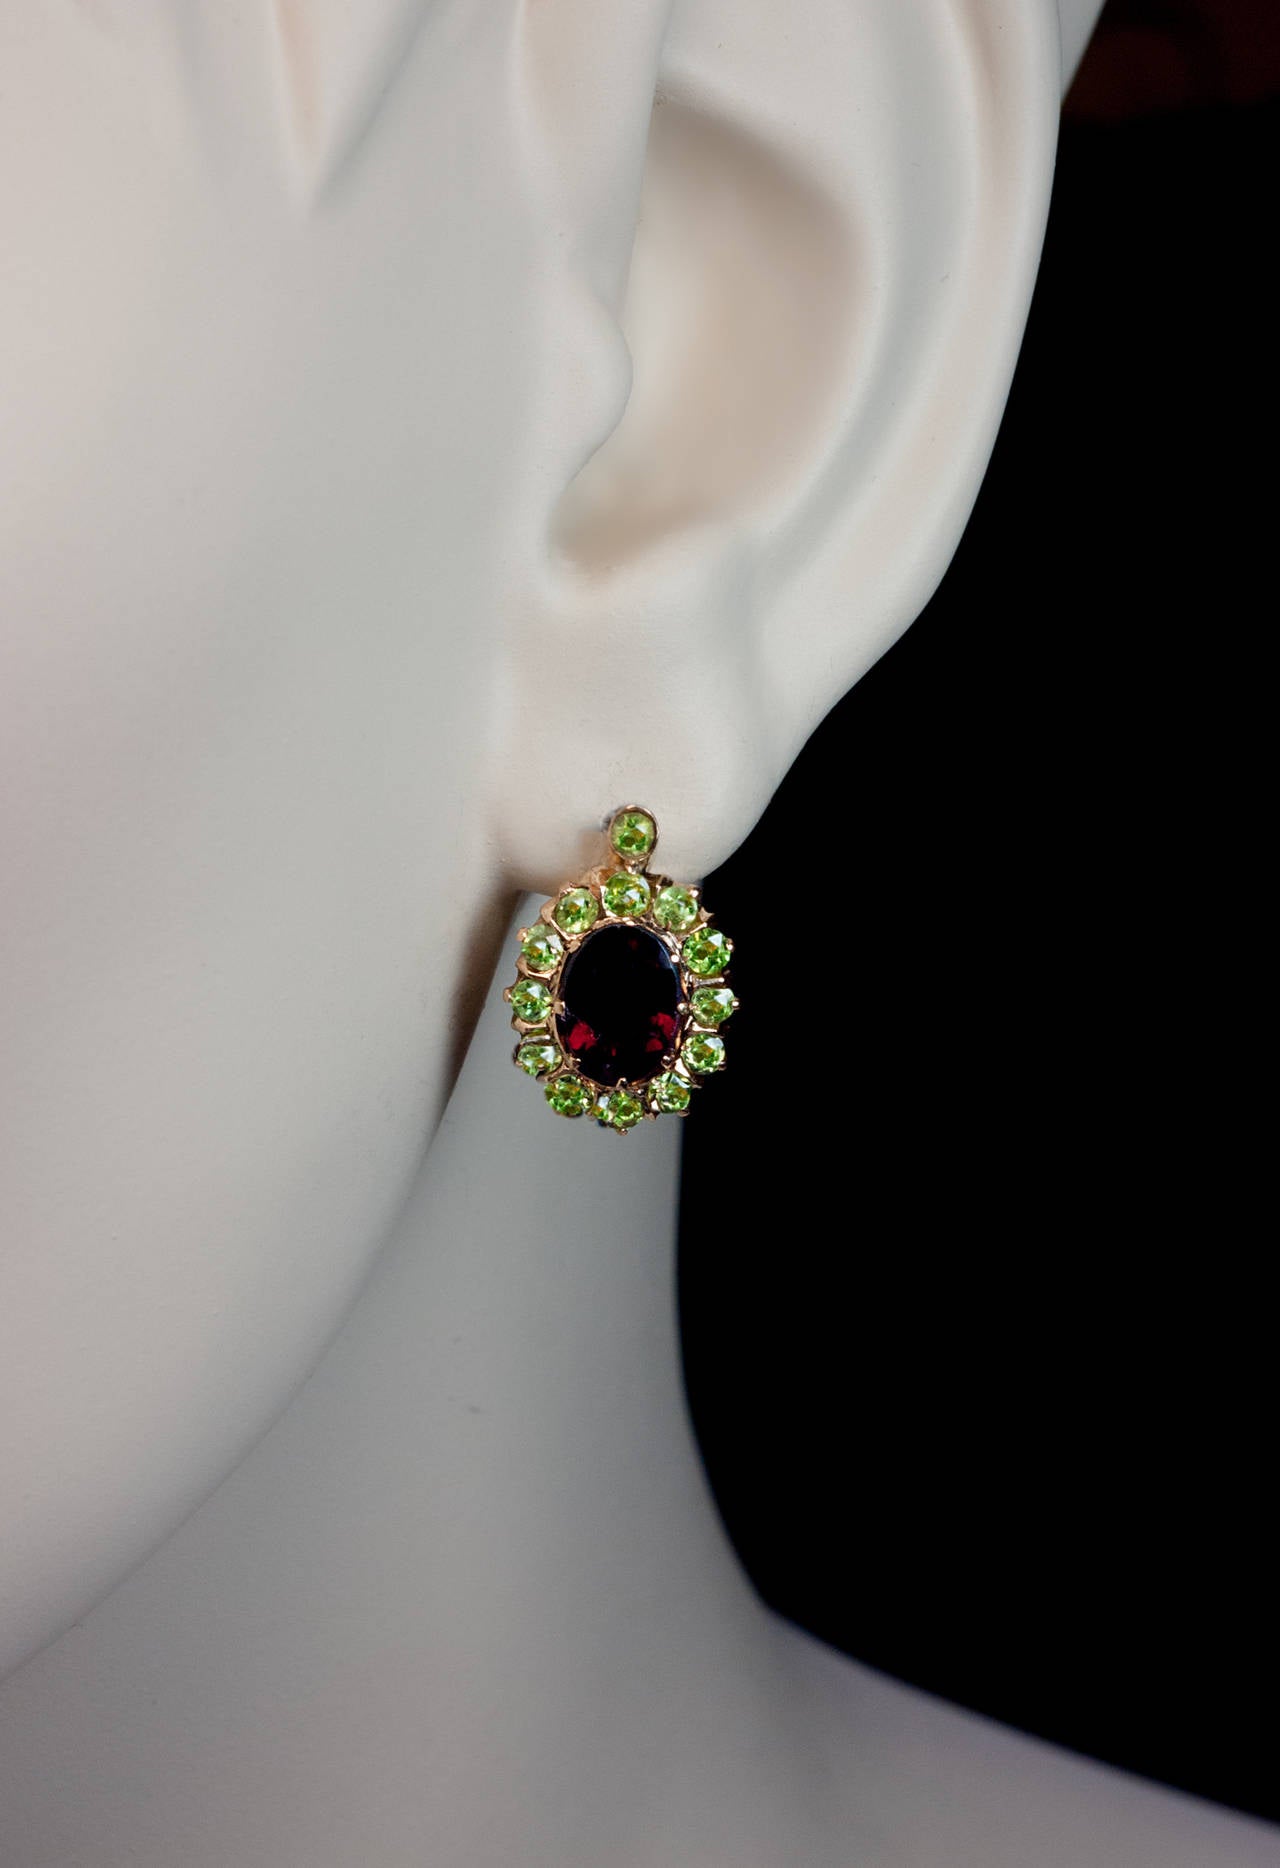 made in St. Petersburg between 1908 and 1917

 The cluster earrings are centered with oval dark red hessonite garnets surrounded by sparkling apple green demantoids.

 Marked with 56 zolotnik gold standard (14K) and maker's initials

 size of